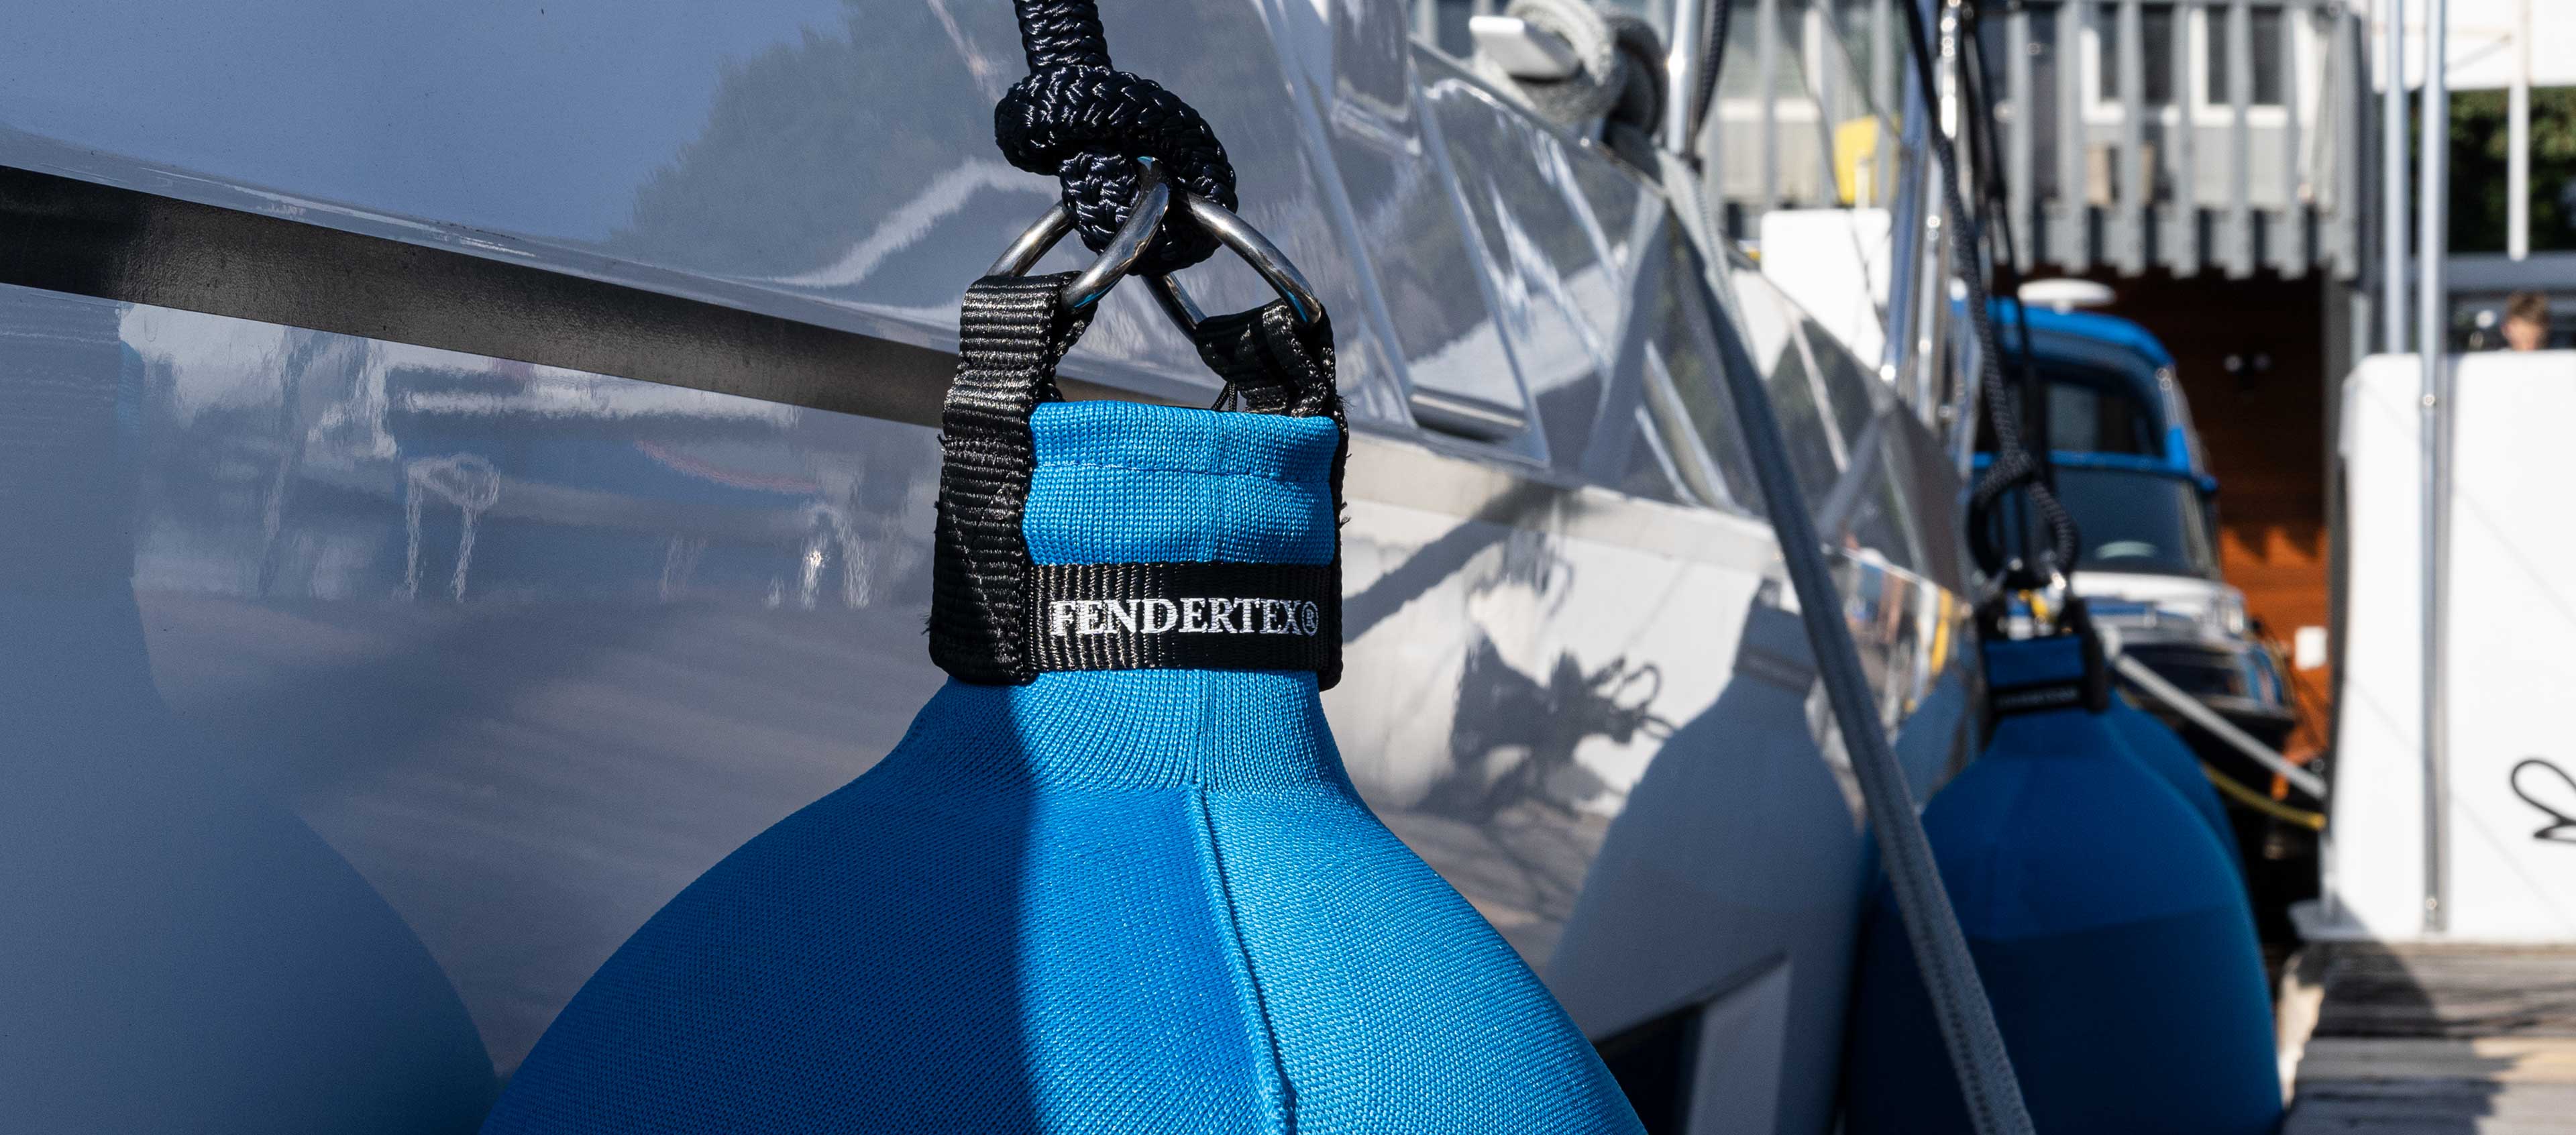 Customize your Fendertex fender to enhance the look of your boat